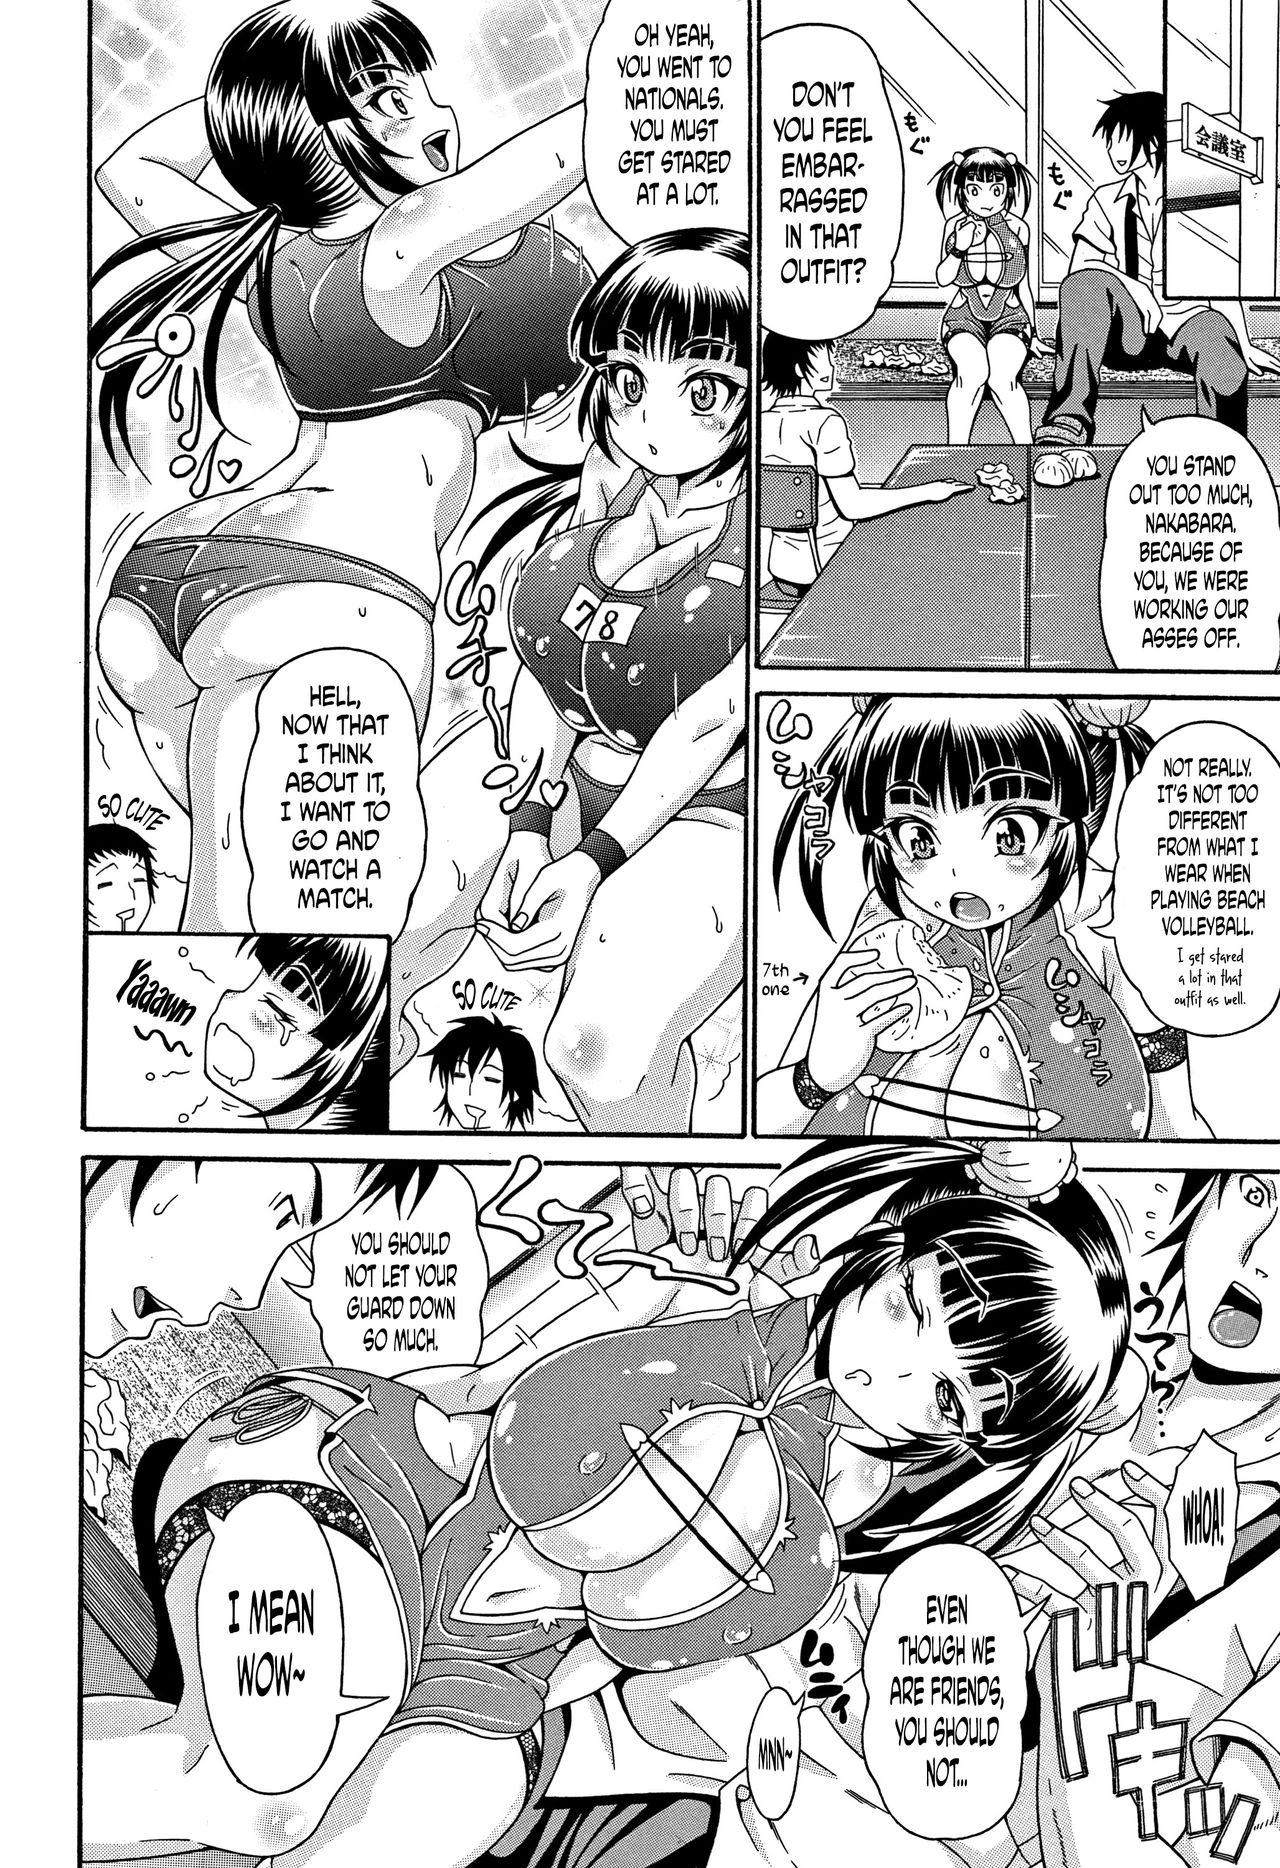 [Andou Hiroyuki] Mamire Chichi - Sticky Tits Feel Hot All Over. Ch.1-6 [English] [doujin-moe.us] 93